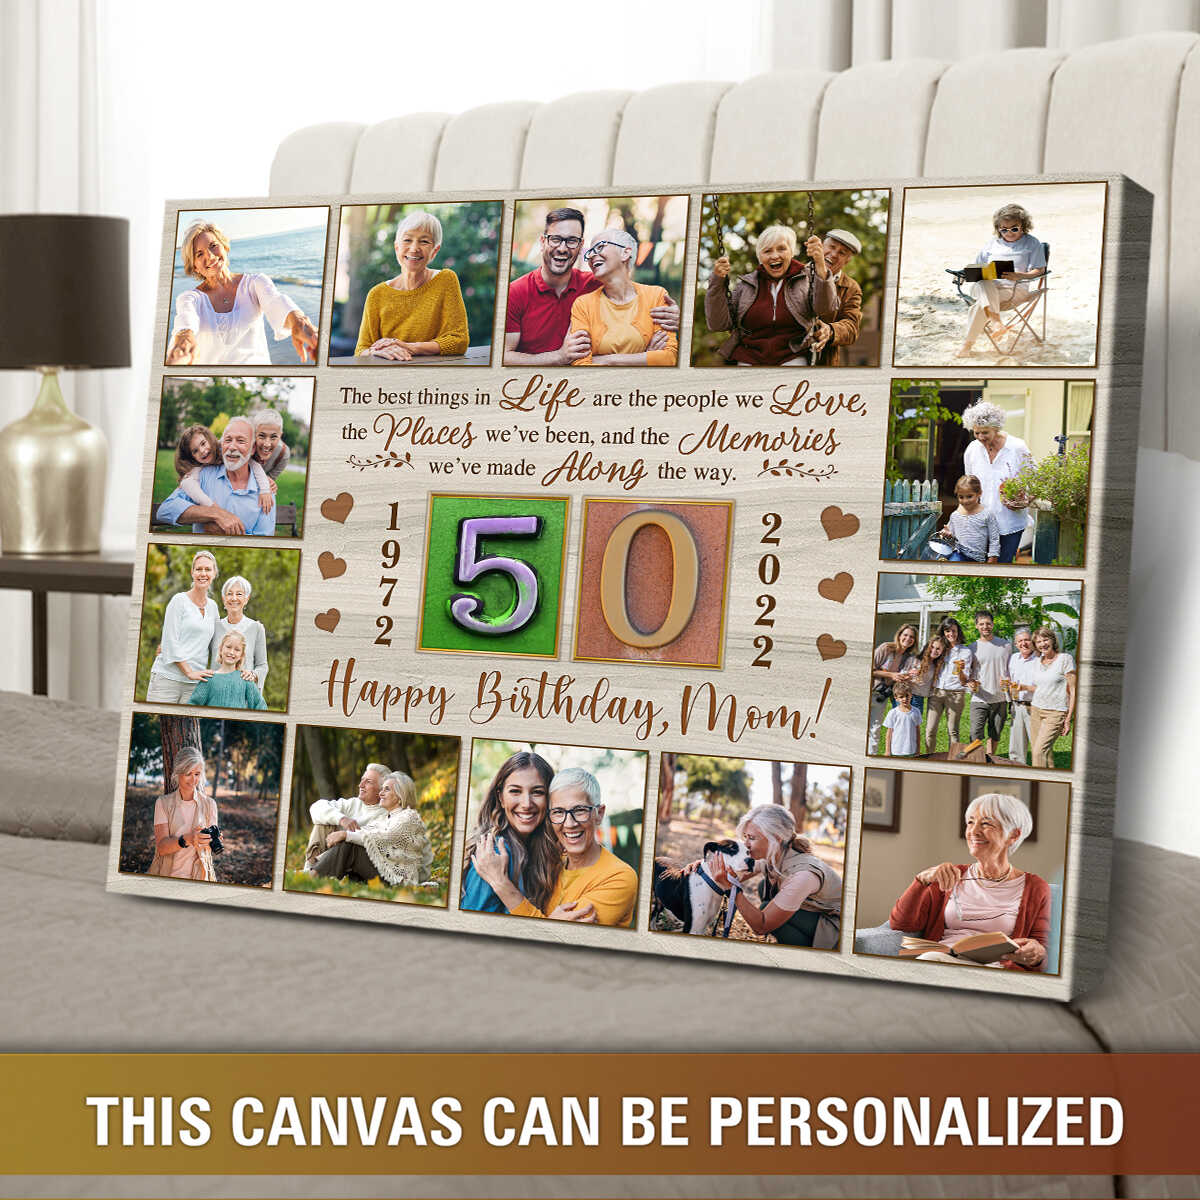 https://images.ohcanvas.com/ohcanvas_com/2022/07/28212553/unique-gifts-50th-birthday-gifts-for-men-who-have-everything-photo-collage-canvas-01.jpg